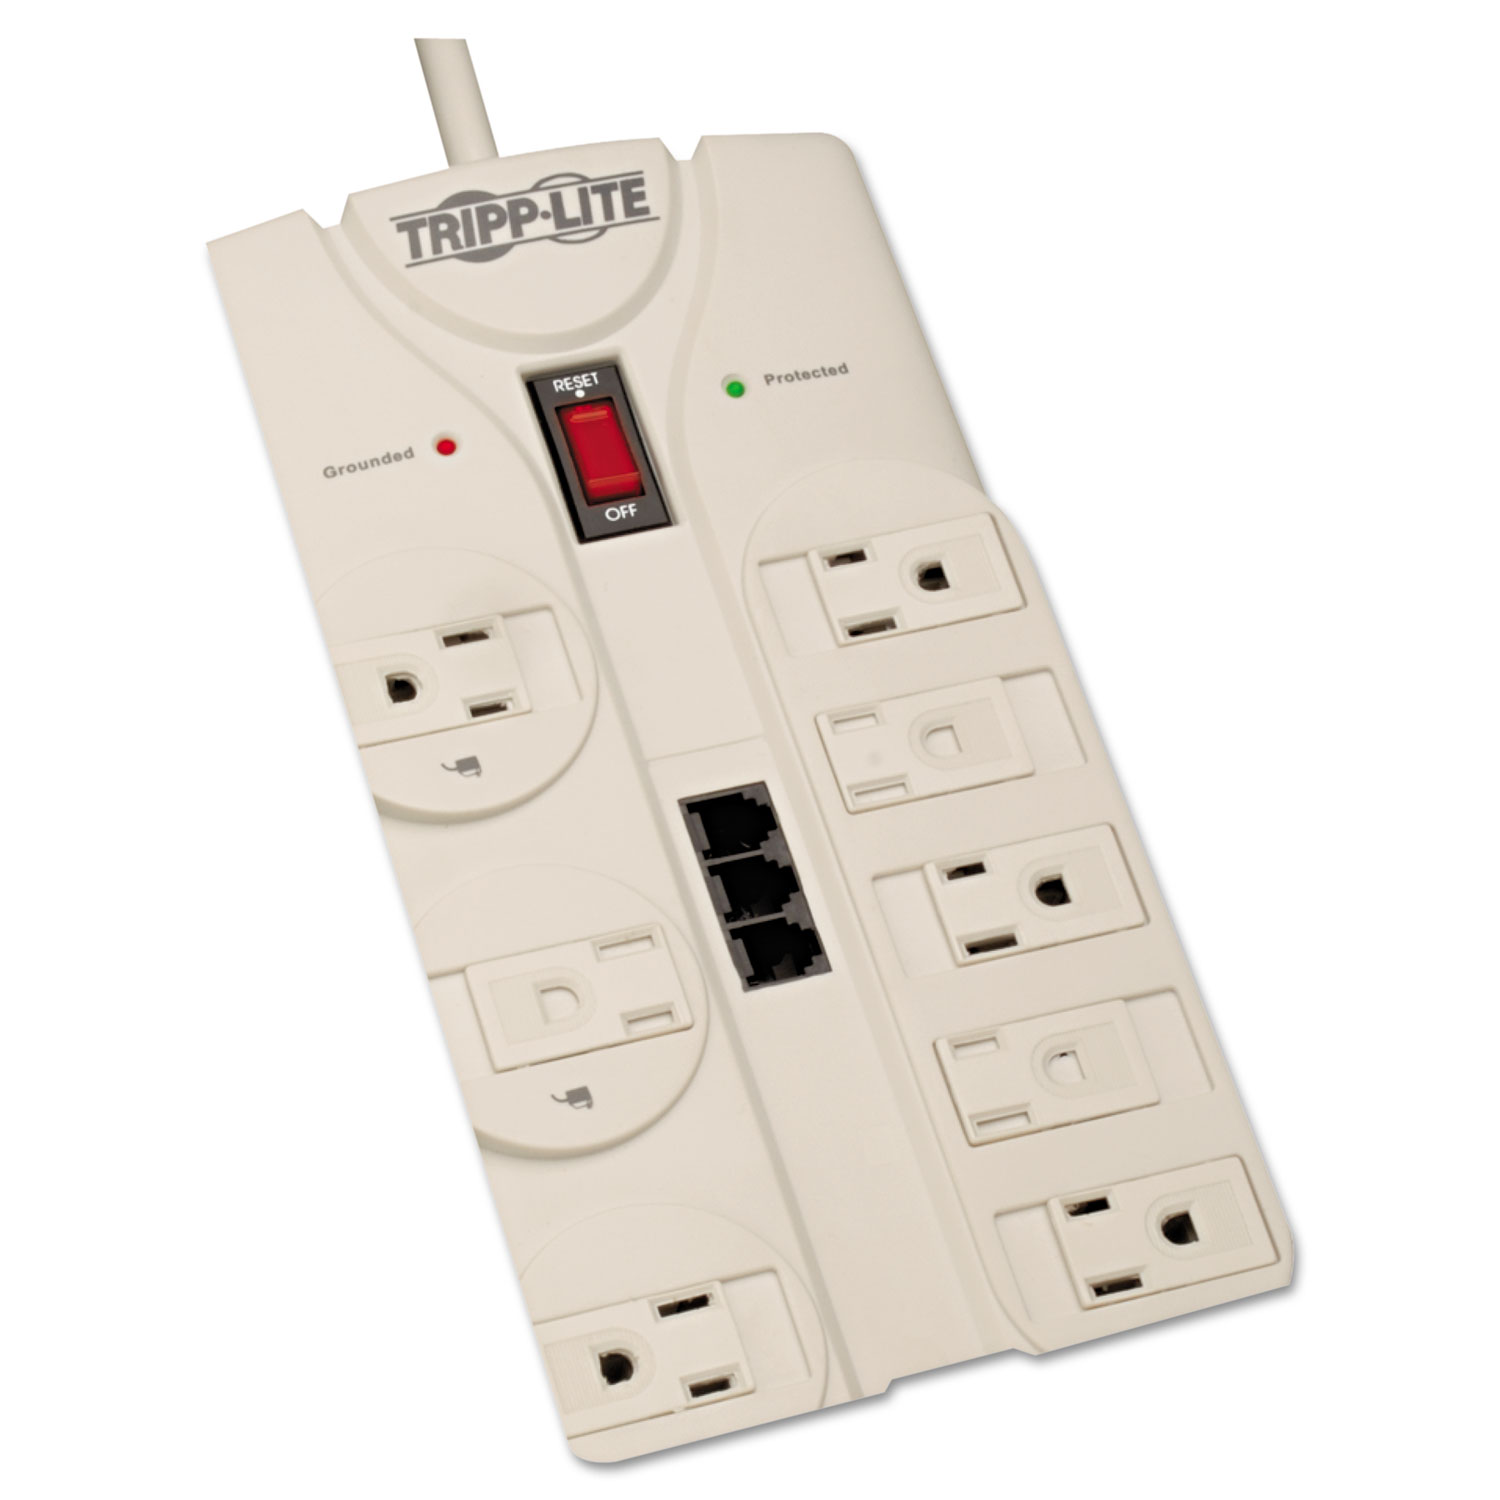  Tripp Lite TLP808TELTAA Protect It! Computer Surge Protector, 8 Outlets, 8 ft. Cord, 3150 Joules, TAA (TRPTLP808TELTAA) 